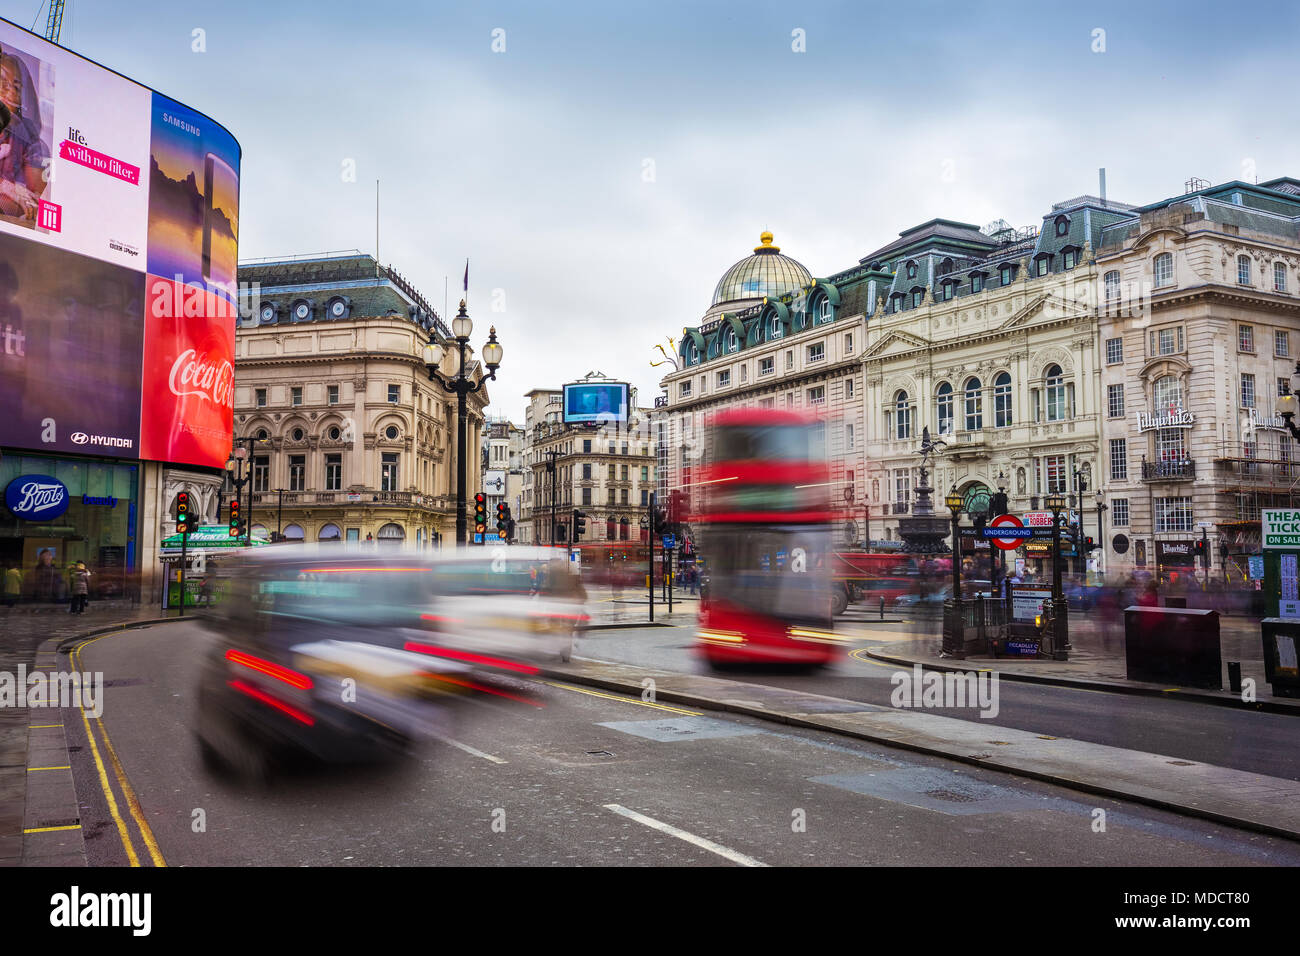 London, England - 03.15.2018: Busy traffic at Piccadilly Circus with iconic red Double-Decker bus and black taxi on the move. Piccadilly Circus is the Stock Photo